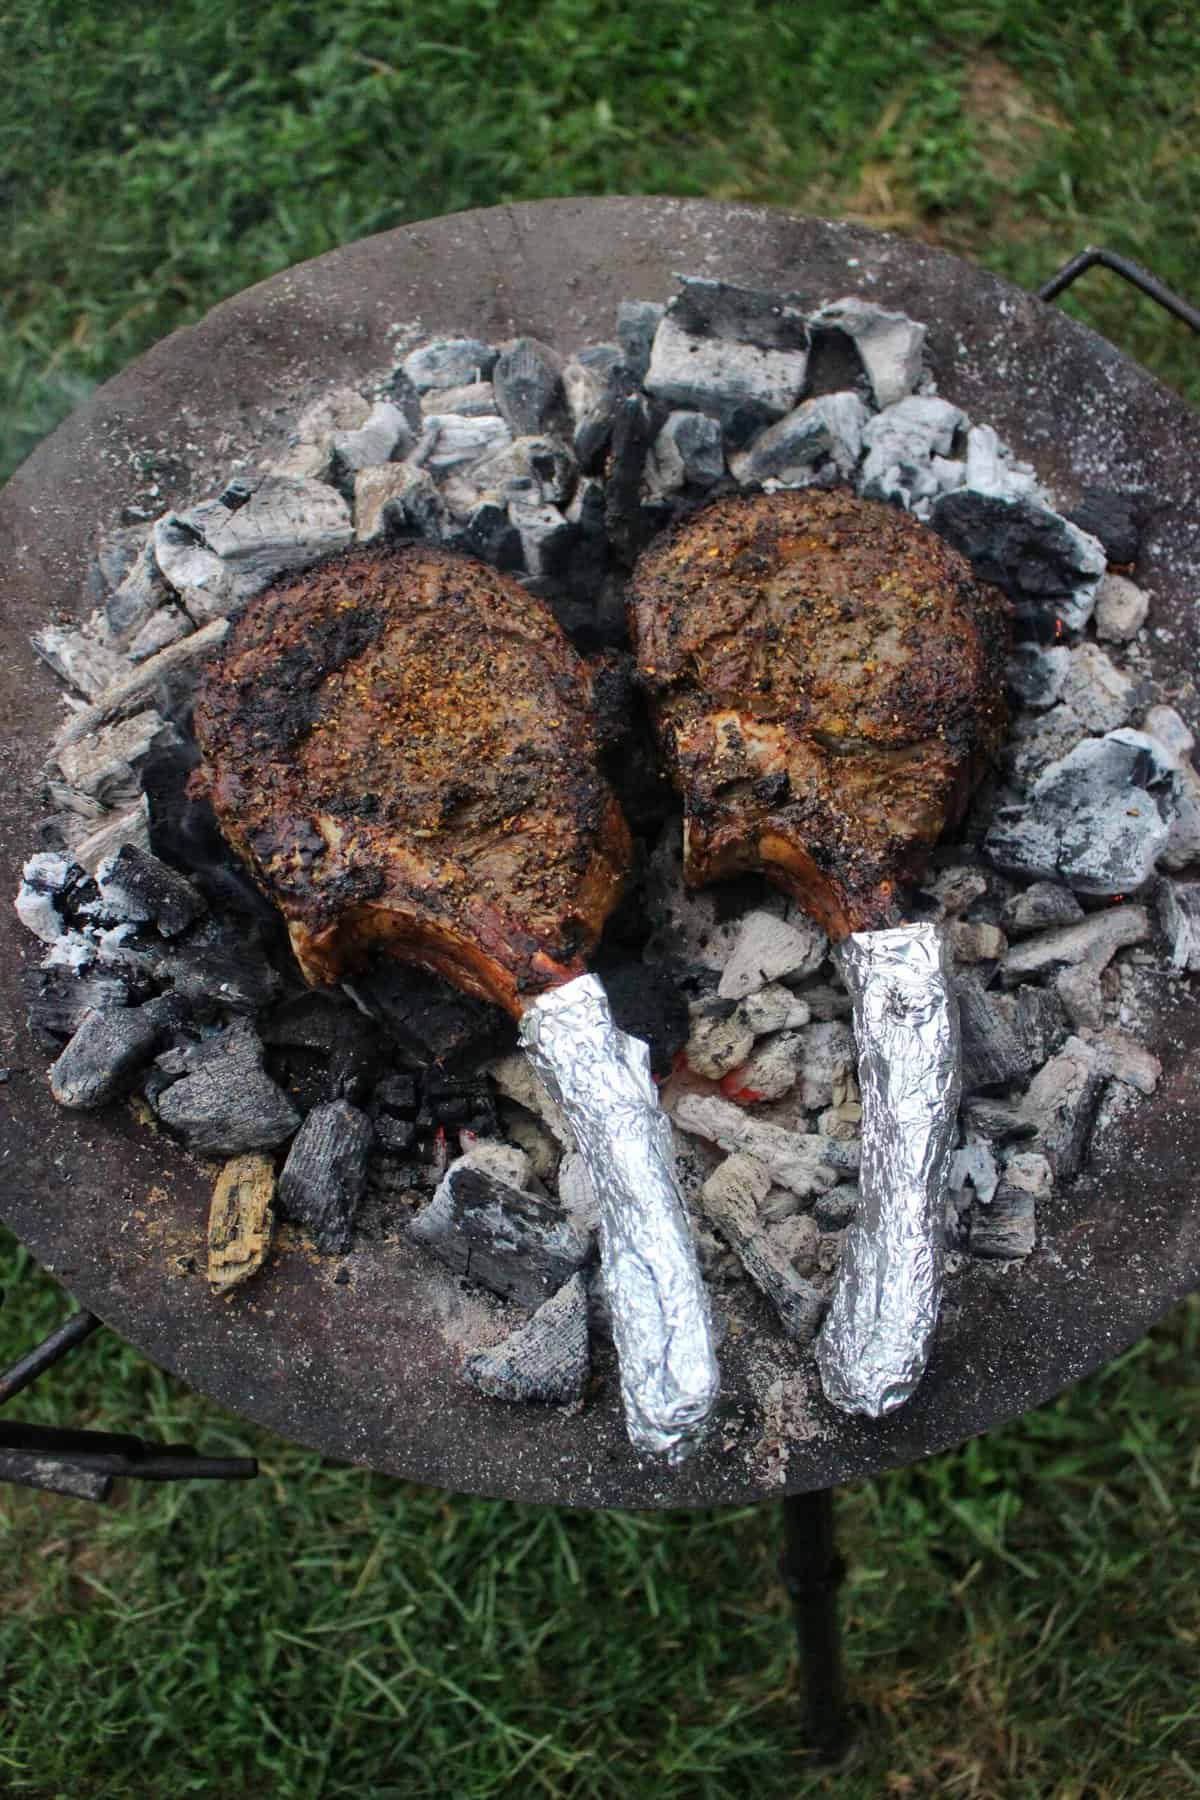 Dirty Tomahawk Steaks with Steakhouse Butter